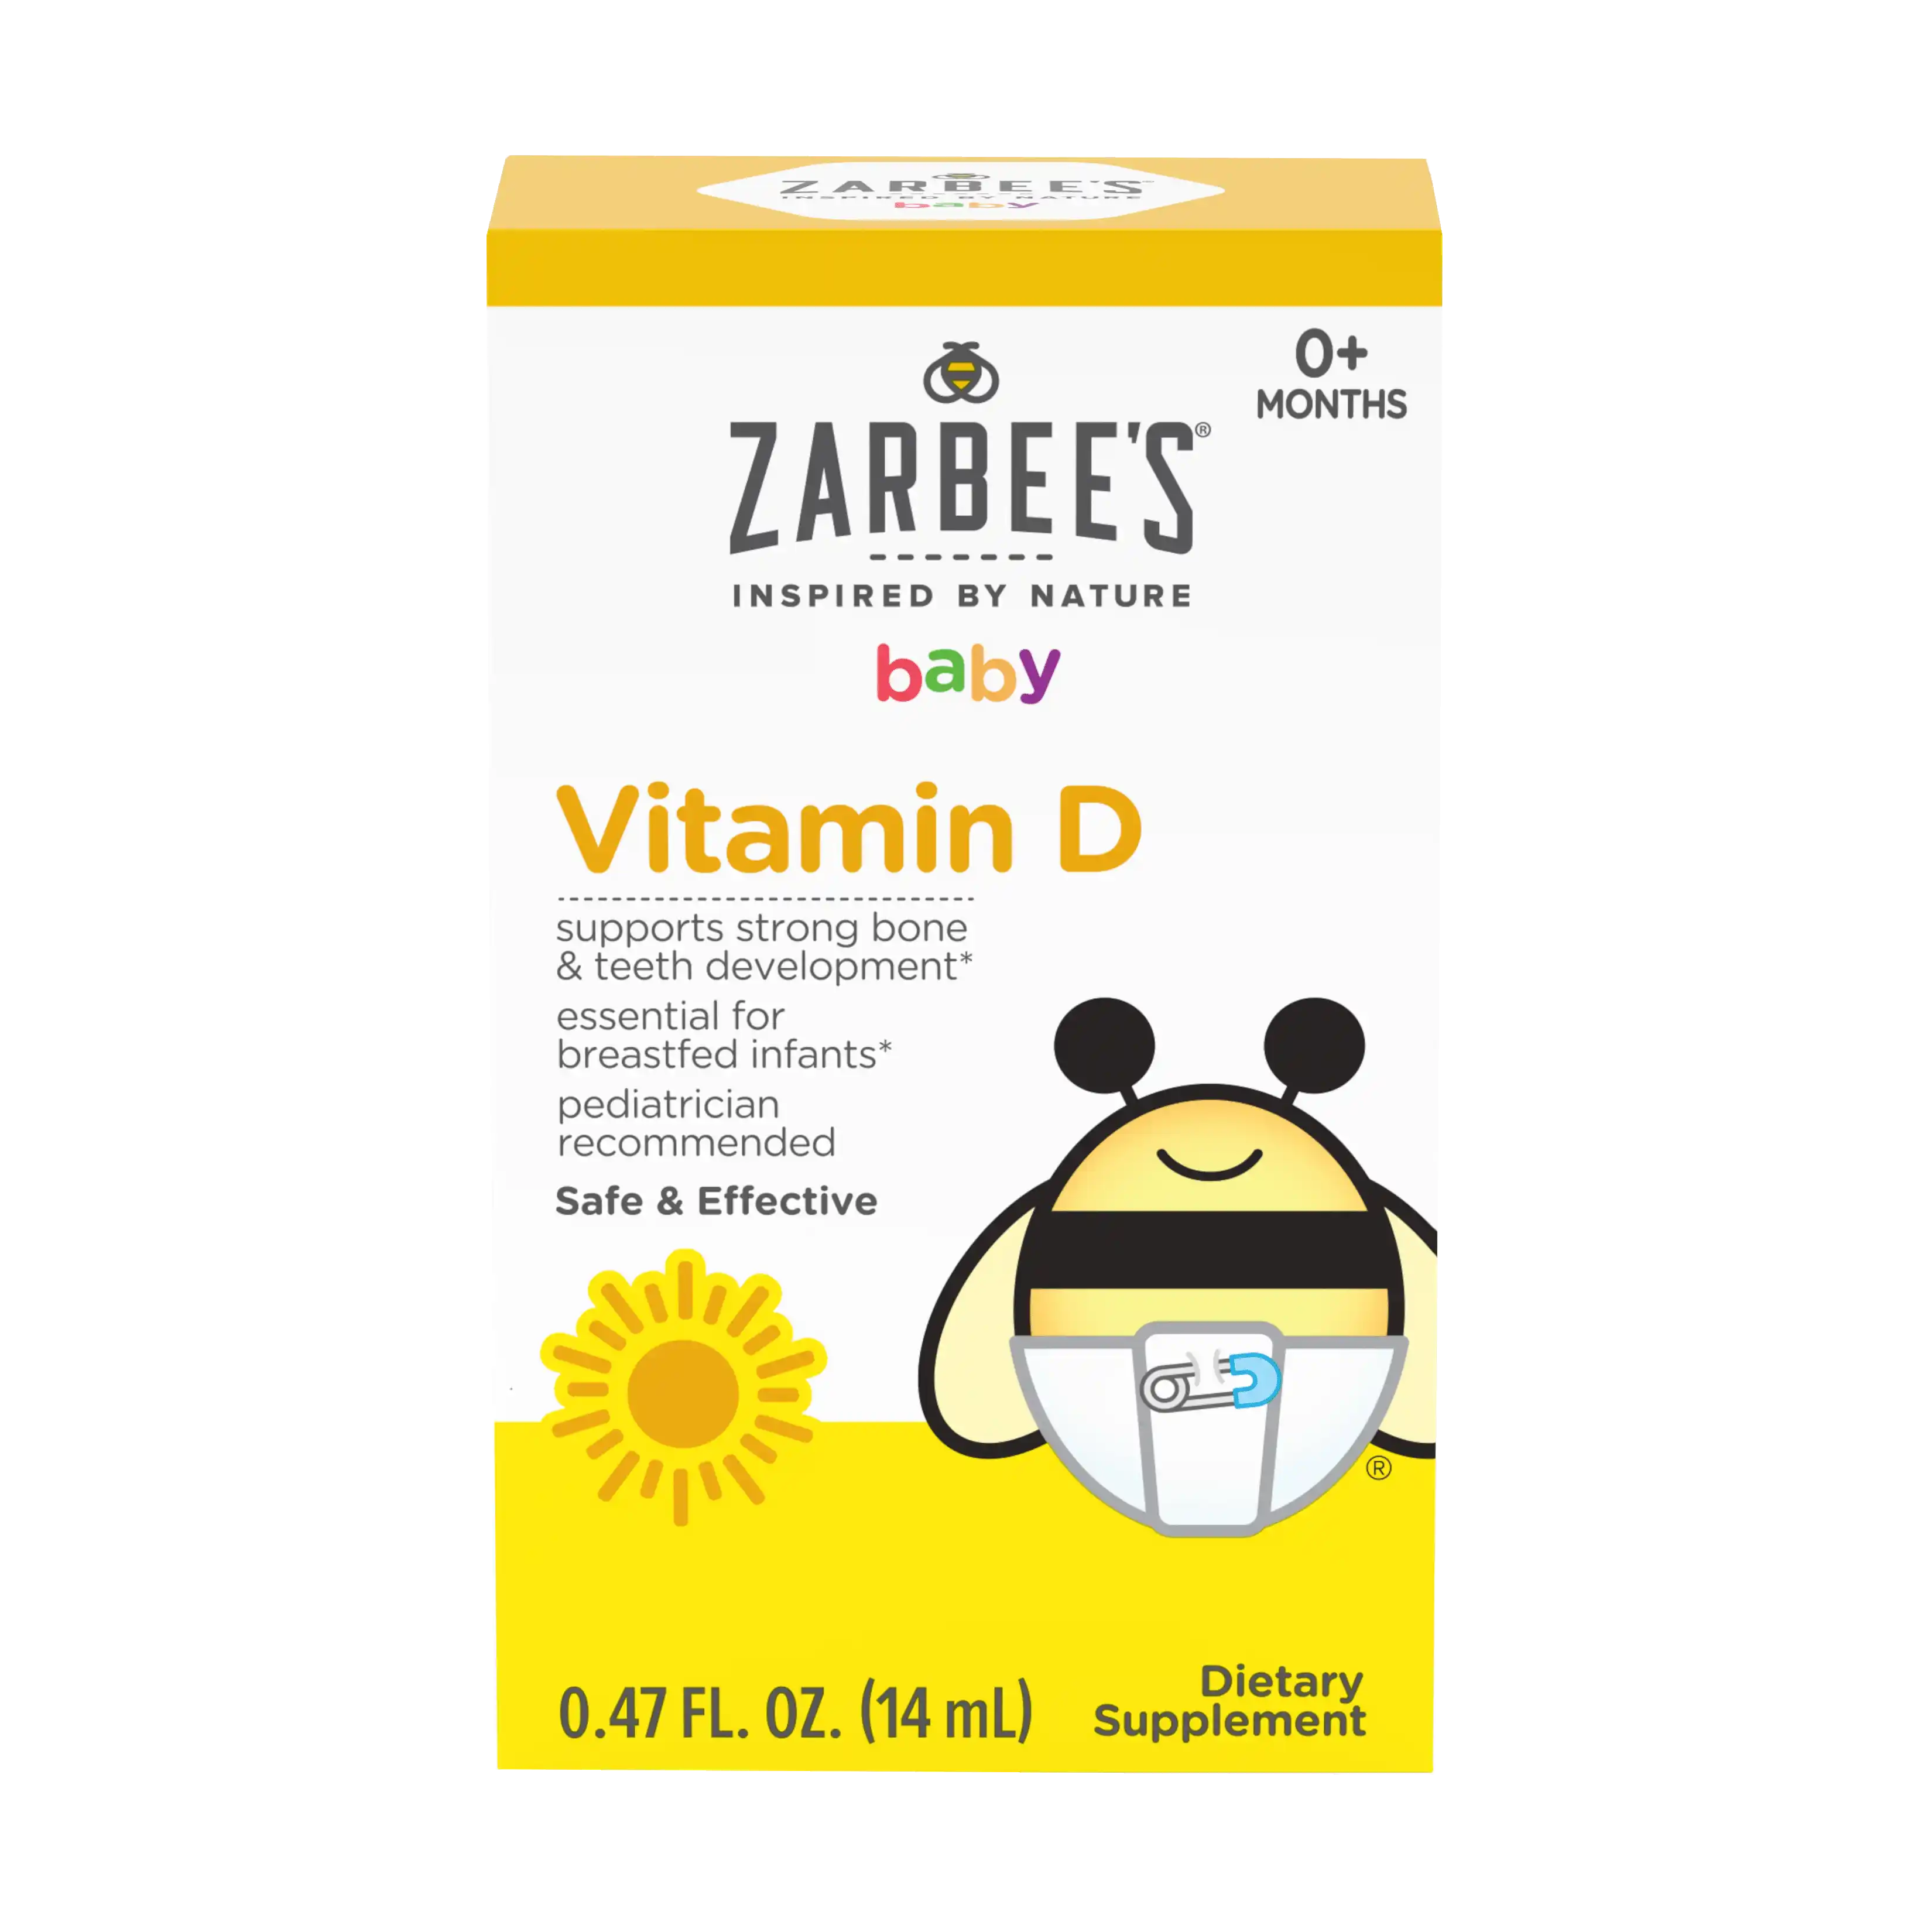 A rendering of the packaging for Zarbee's® Vitamin D supplement for babies